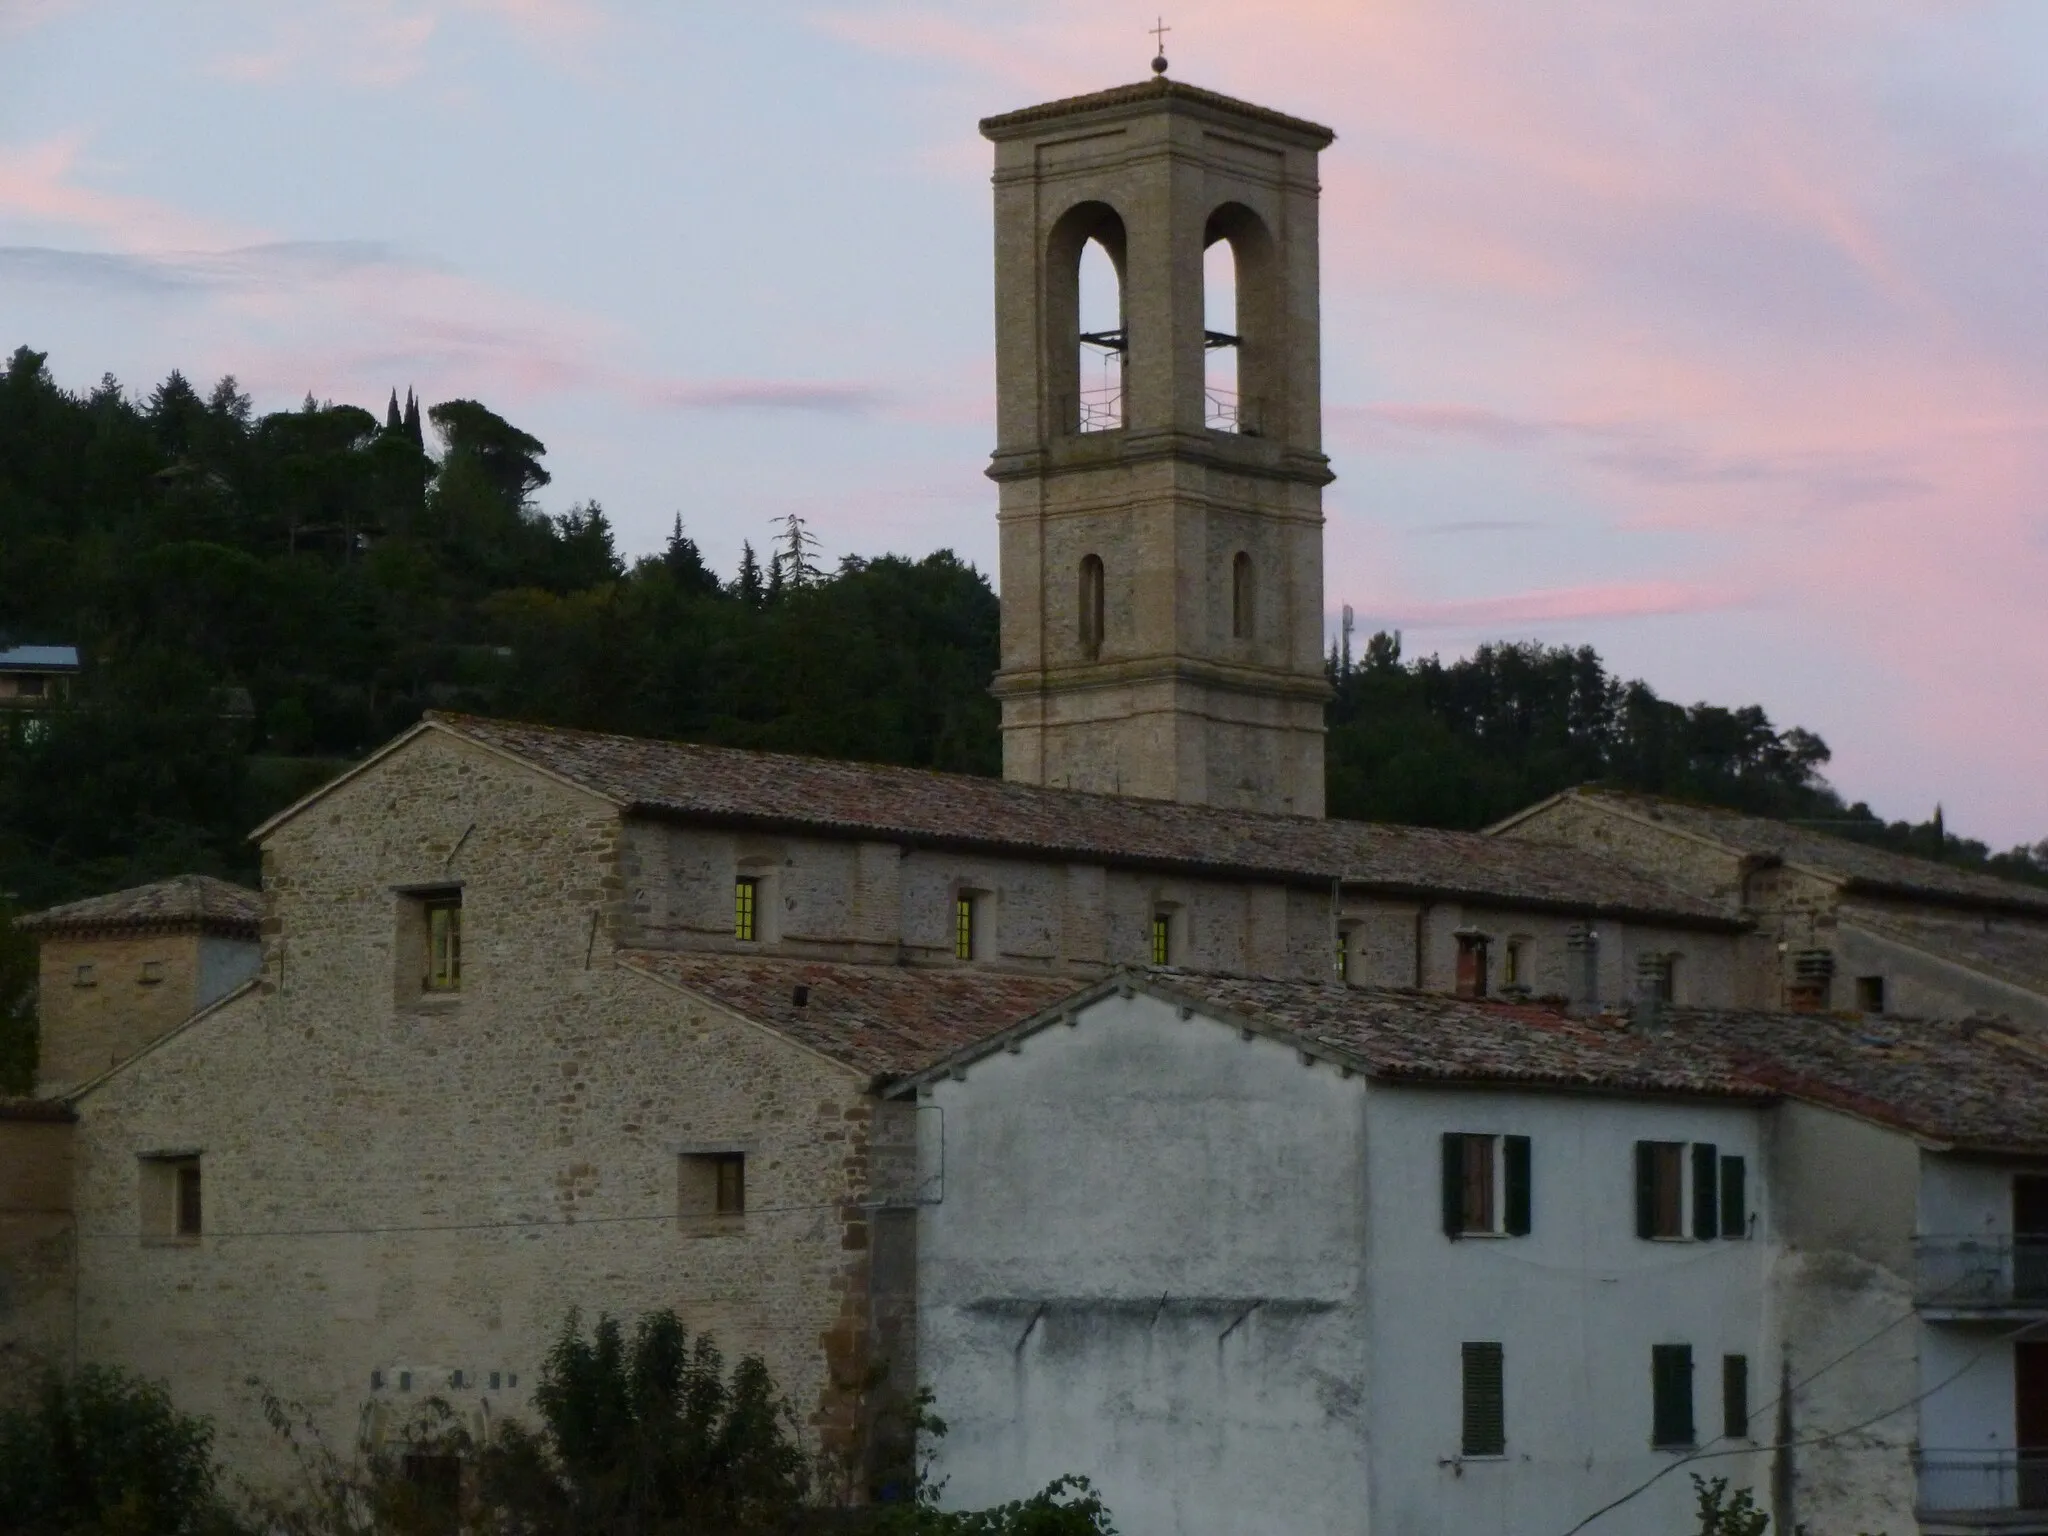 Image of Sant'Angelo in Vado